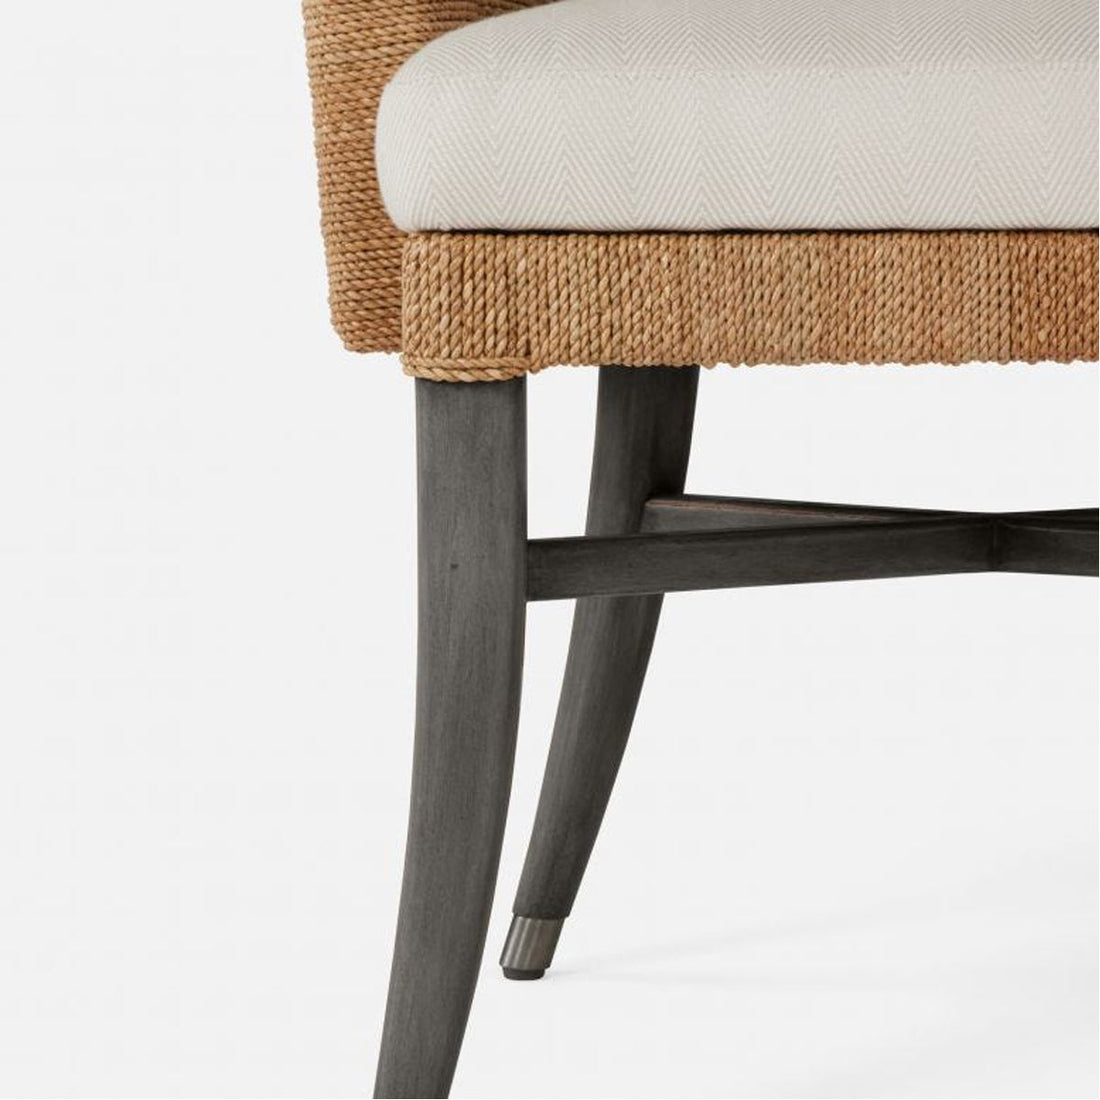 Made Goods Vivaan Shell Upholstered Dining Chair, Arno Fabric